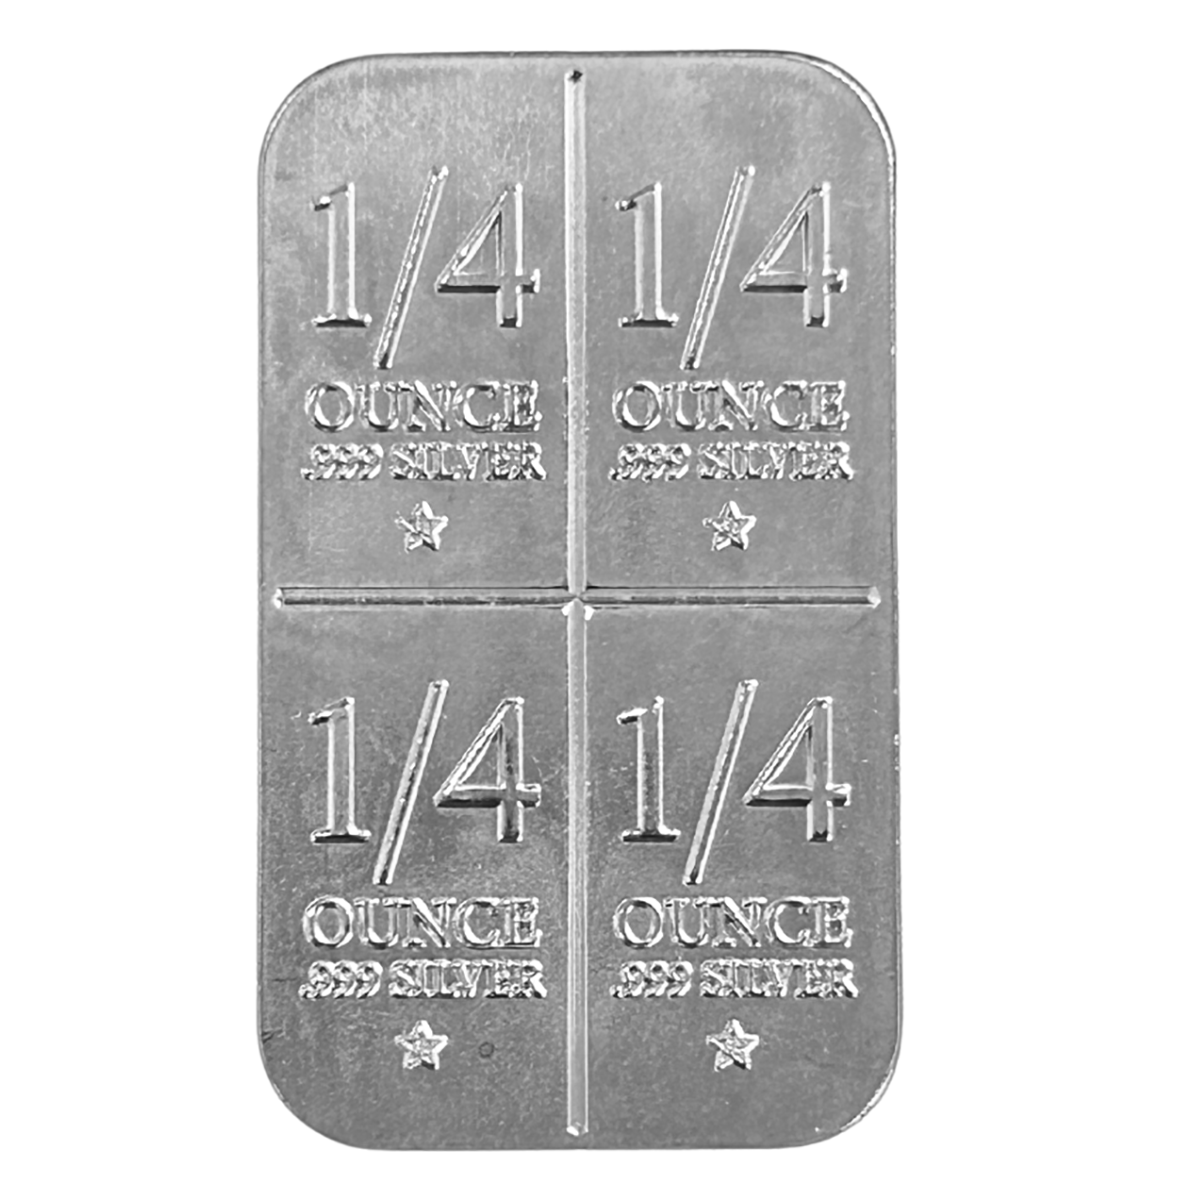 Come and Take It Divisible 1 oz Silver Bar